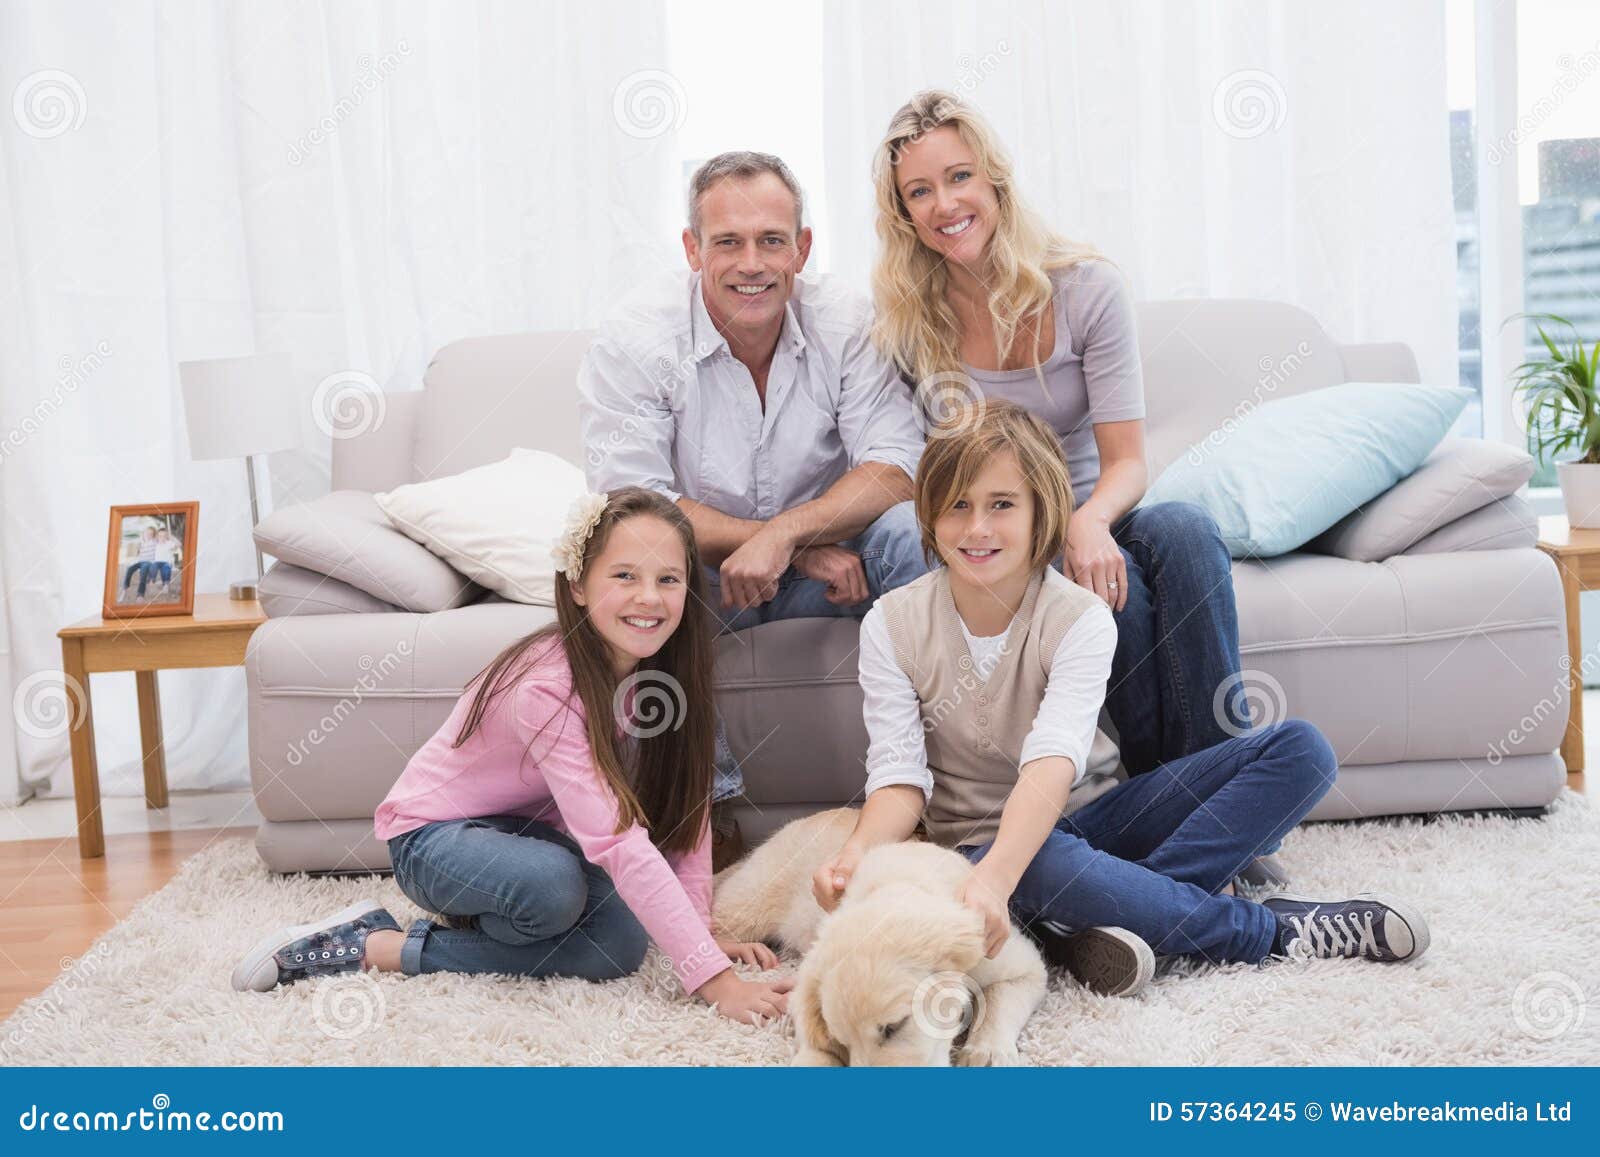 Smiling Family With Their Pet Yellow Labrador On The Rug 